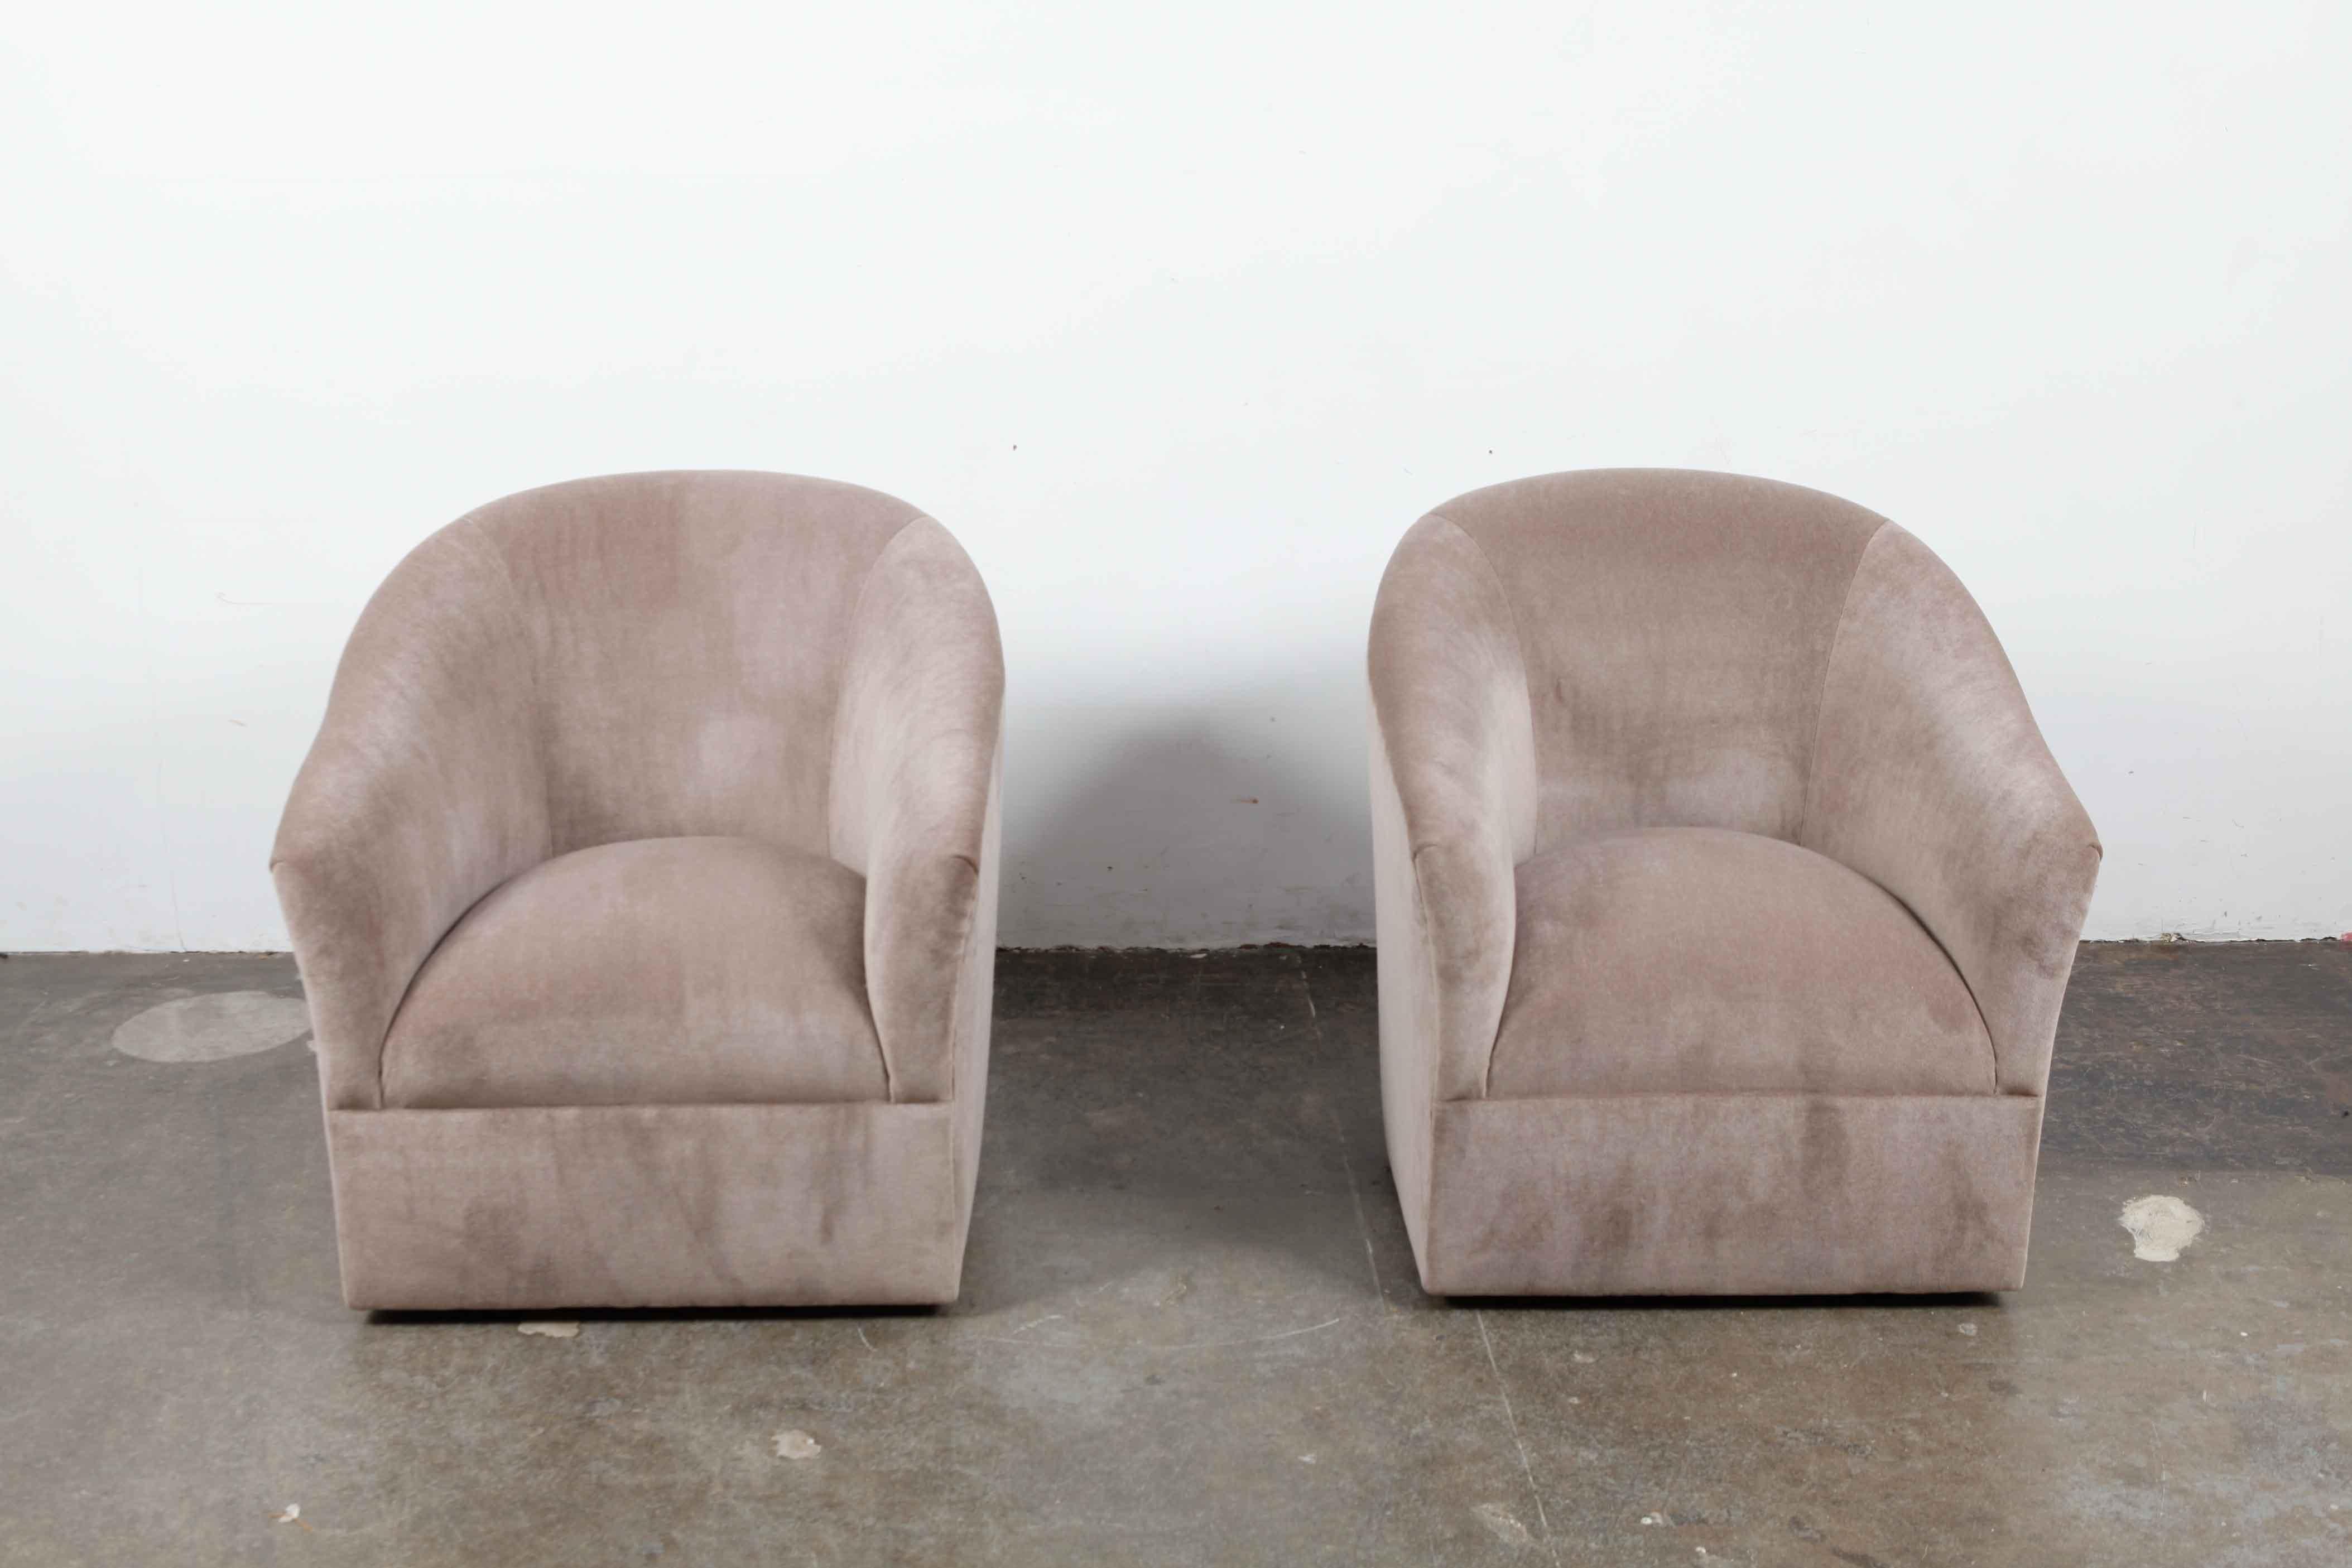 Pair of 1960s American swivel chairs newly upholstered in a grey or brown mohair with a tight back or tight seat upholstery style. Taller, curved back with sloping arms make these an elegant and clean chair that are also quite comfortable.